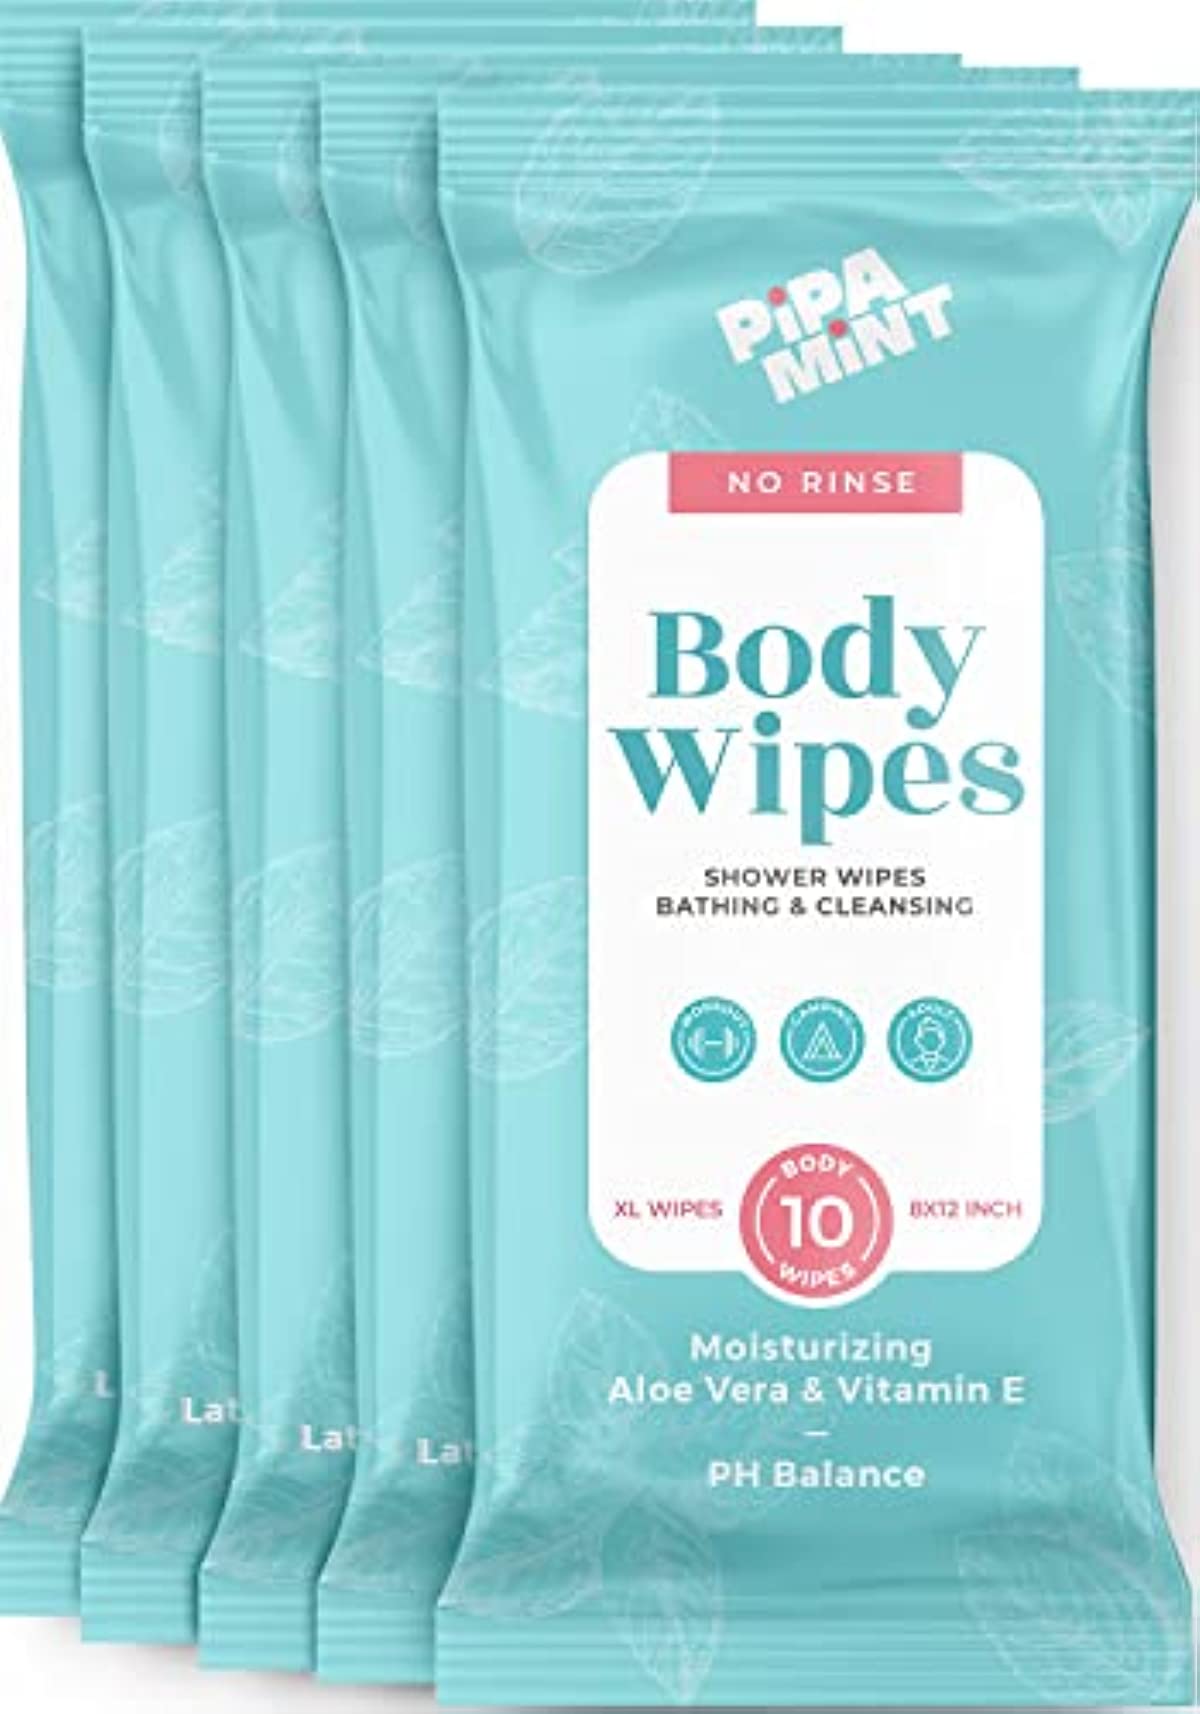 Body Wipes (5 Pack) – 50 XL Shower Wipes, Body Wipes for Adults Bathing, Adult wipes - Bath Wipes for Adults No Rinse, with Vitamin E & Aloe Vera, Alcohol-Free, Rinse Free (8x12 Inch)